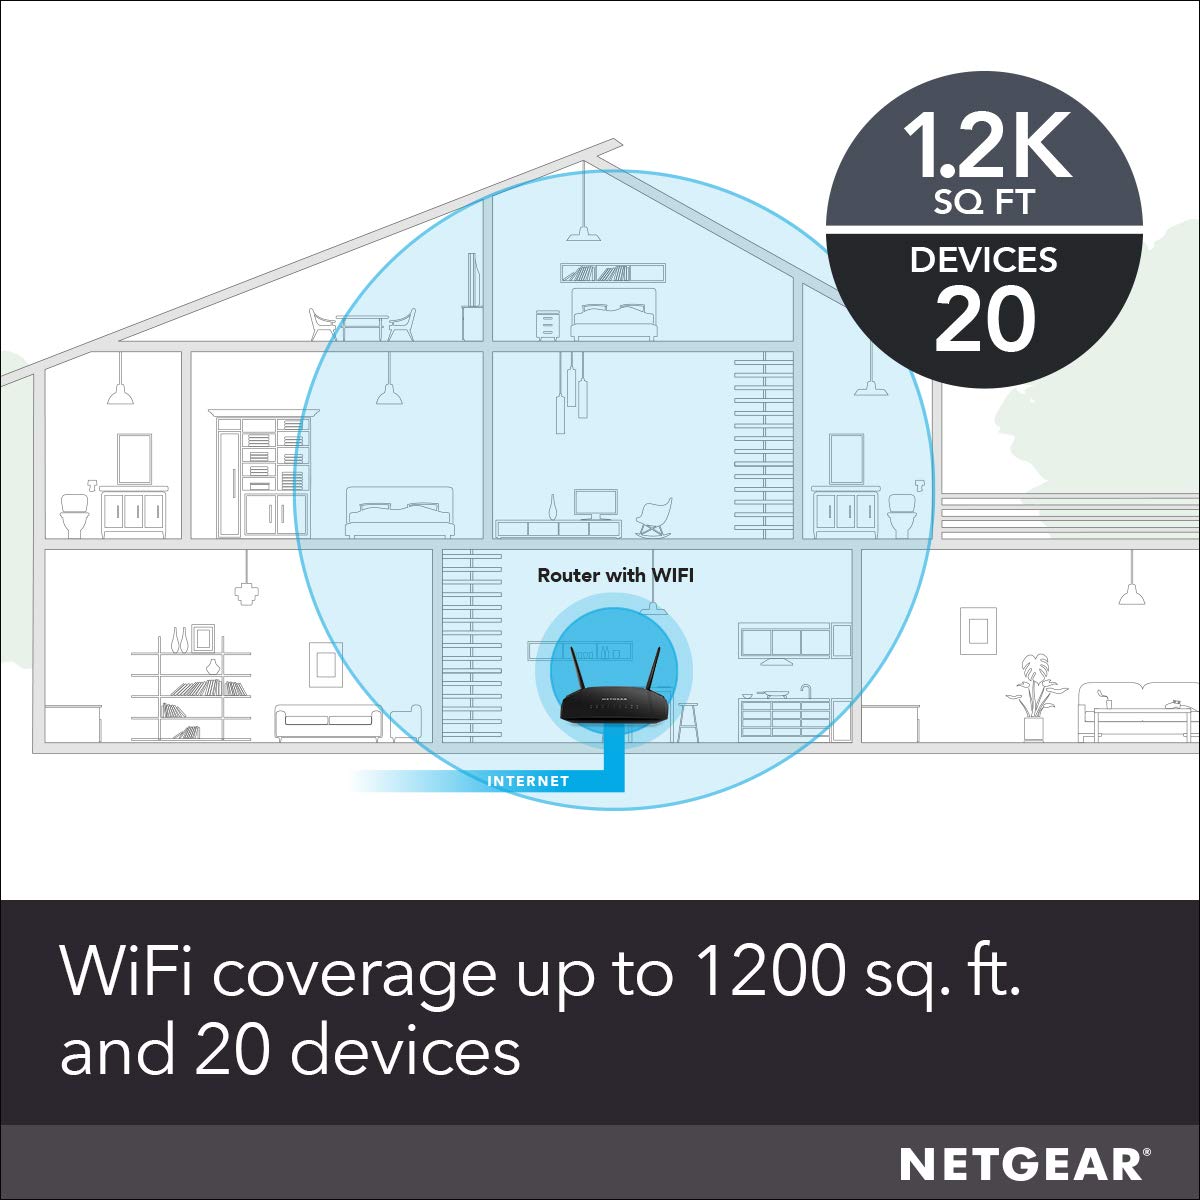 NETGEAR WiFi Router (R6230) - AC1200 Dual Band Wireless Speed (up to 1200 Mbps) | Up to 1200 sq ft Coverage & 20 Devices | 4 x 1G Ethernet and 1 x 2.0 USB ports